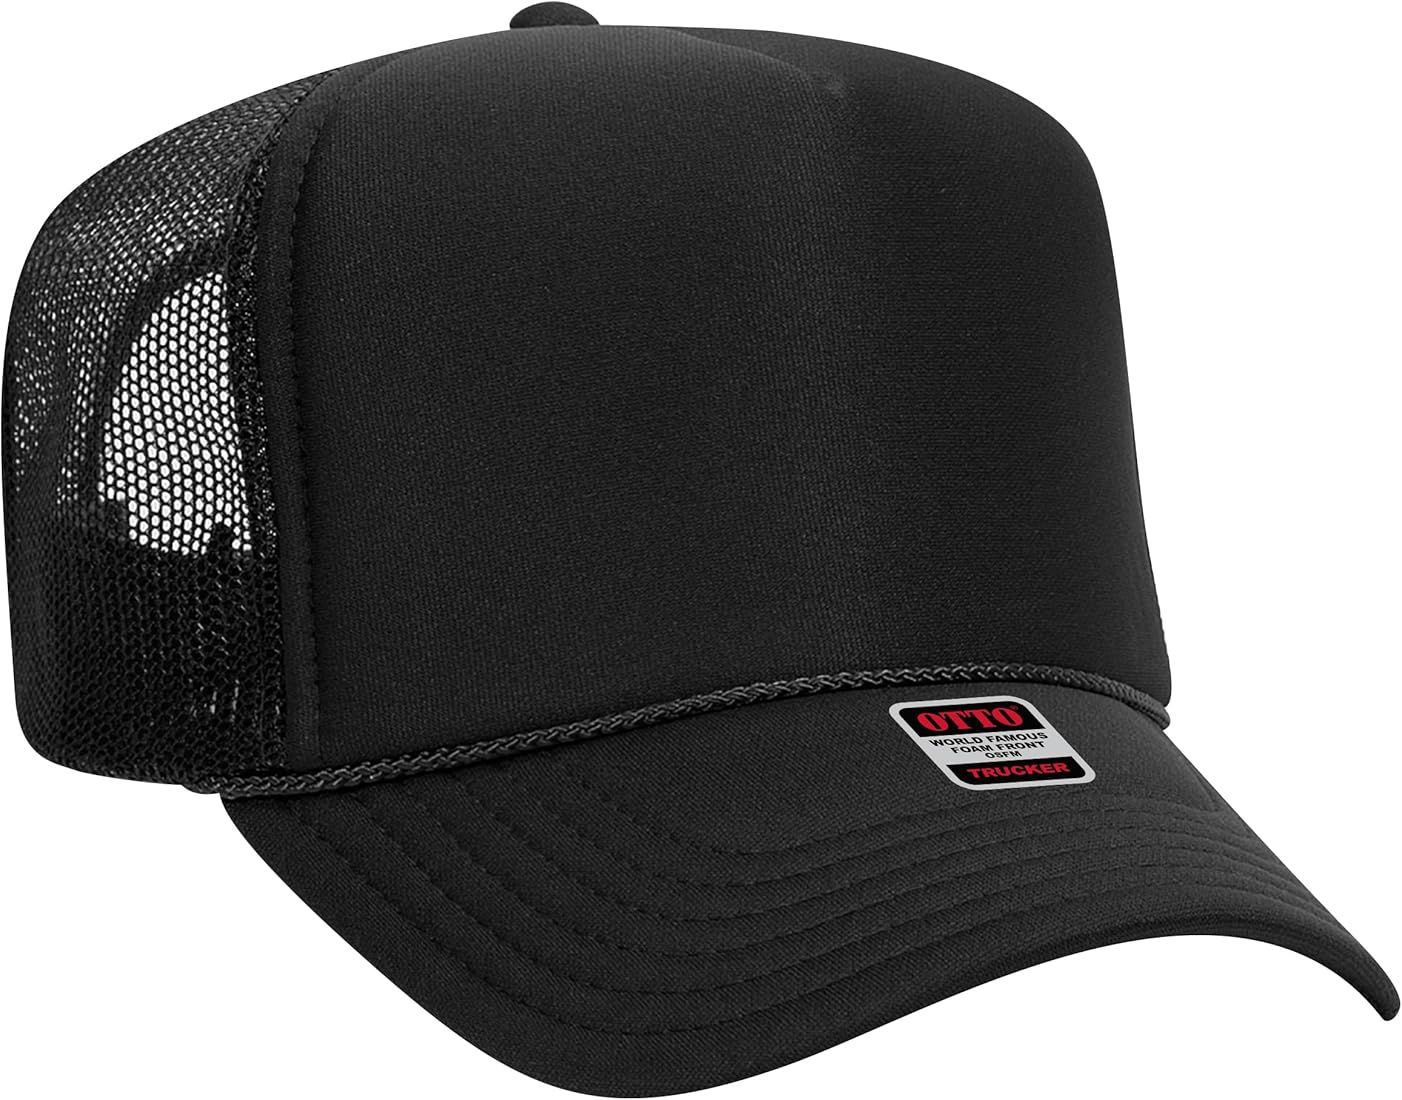 The World's Greatest Blank Trucker Hat in 91 Colors - Wholesale Classic 5 Panel High Crown Mesh B... | Amazon (US)